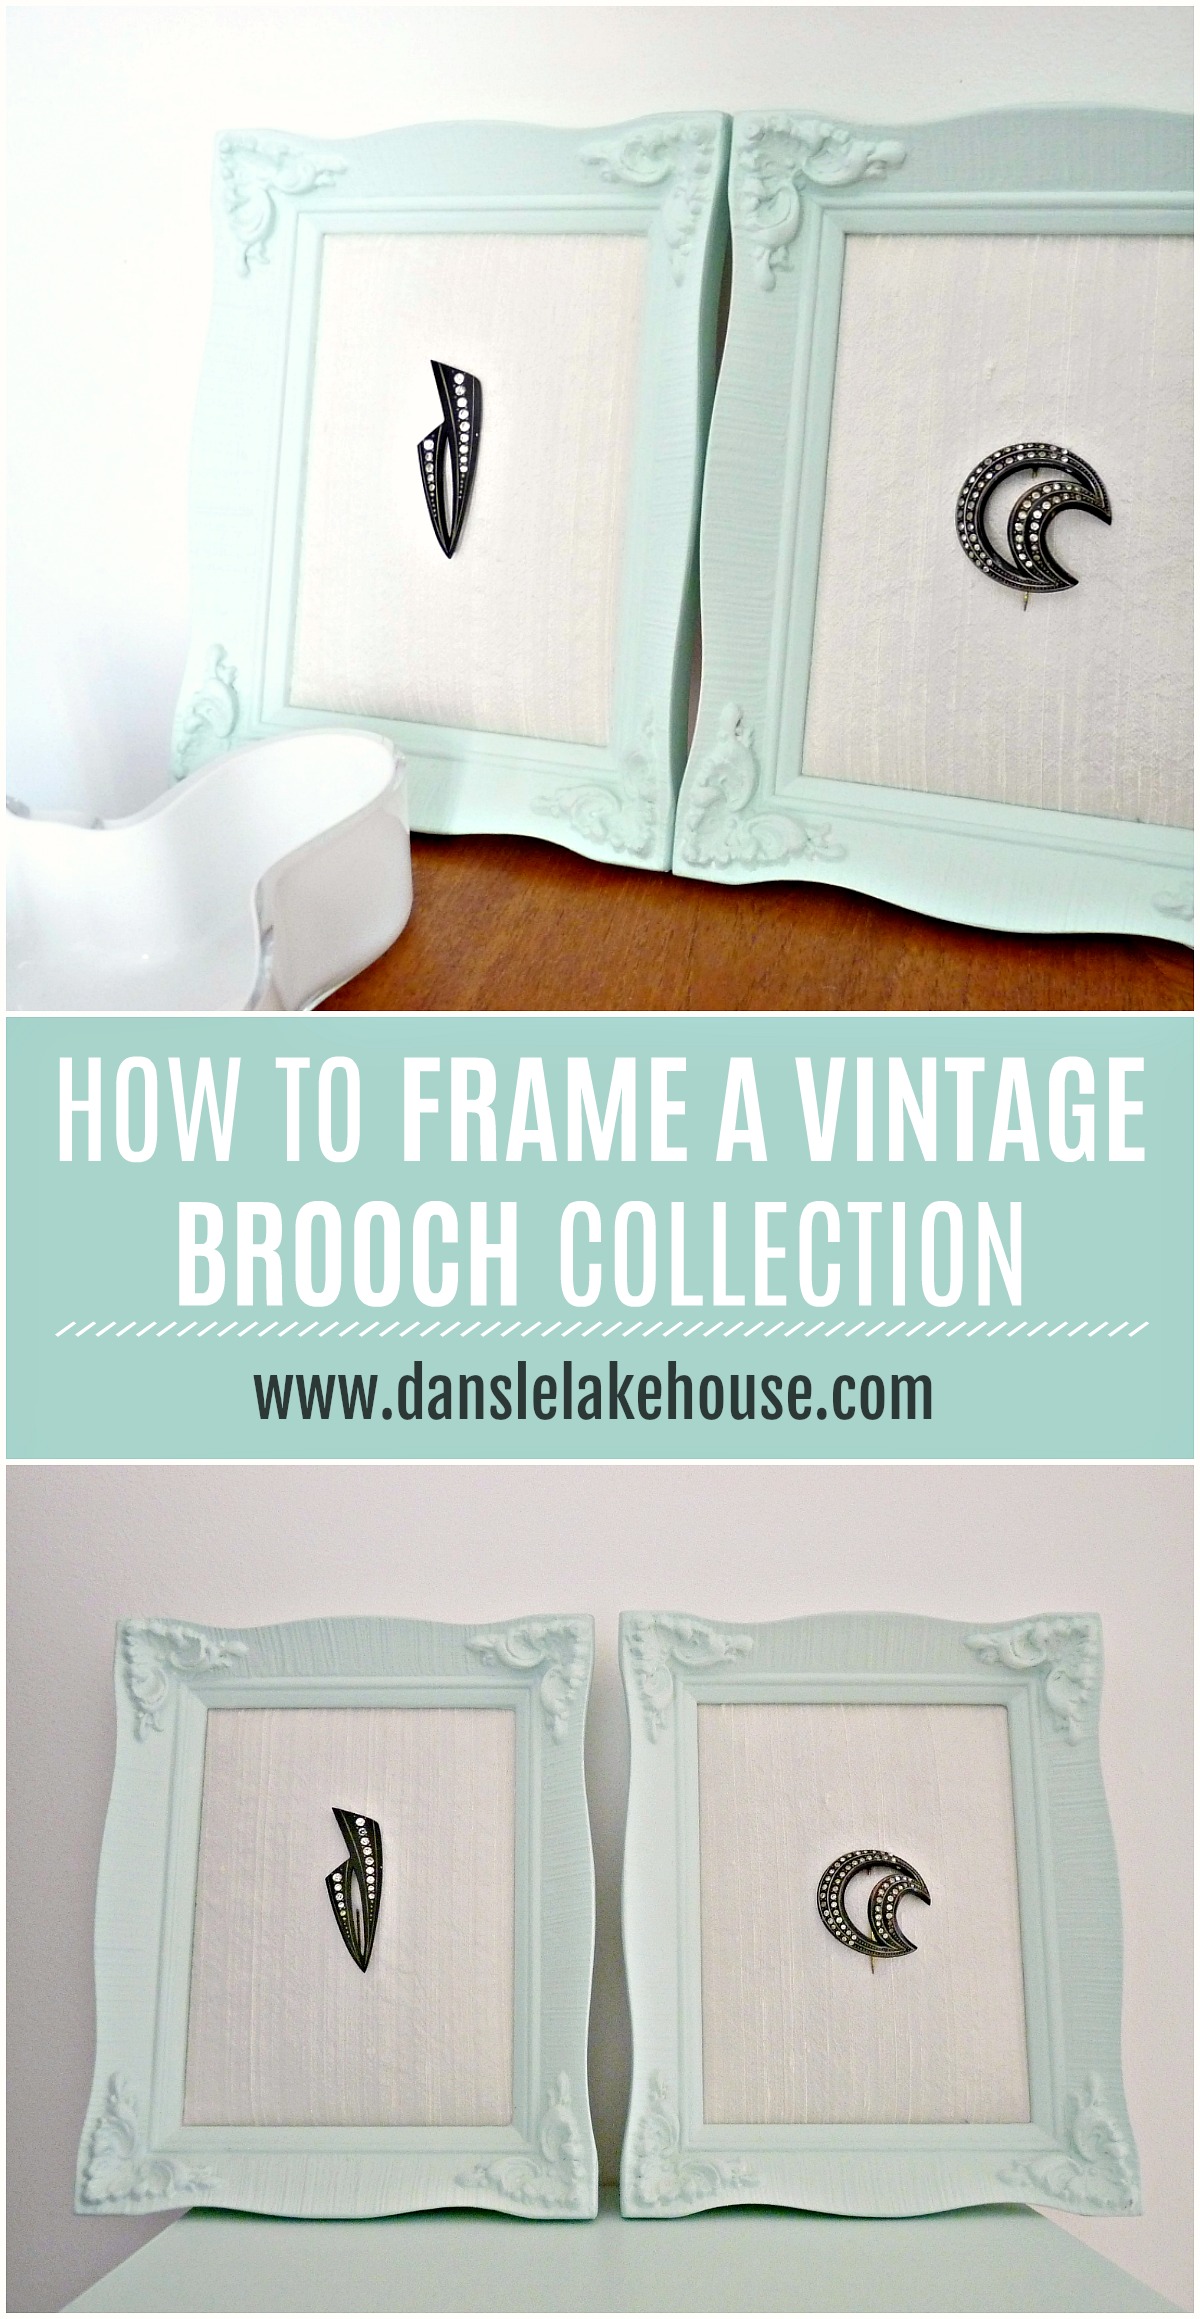 How to Frame a Vintage Brooch Collection